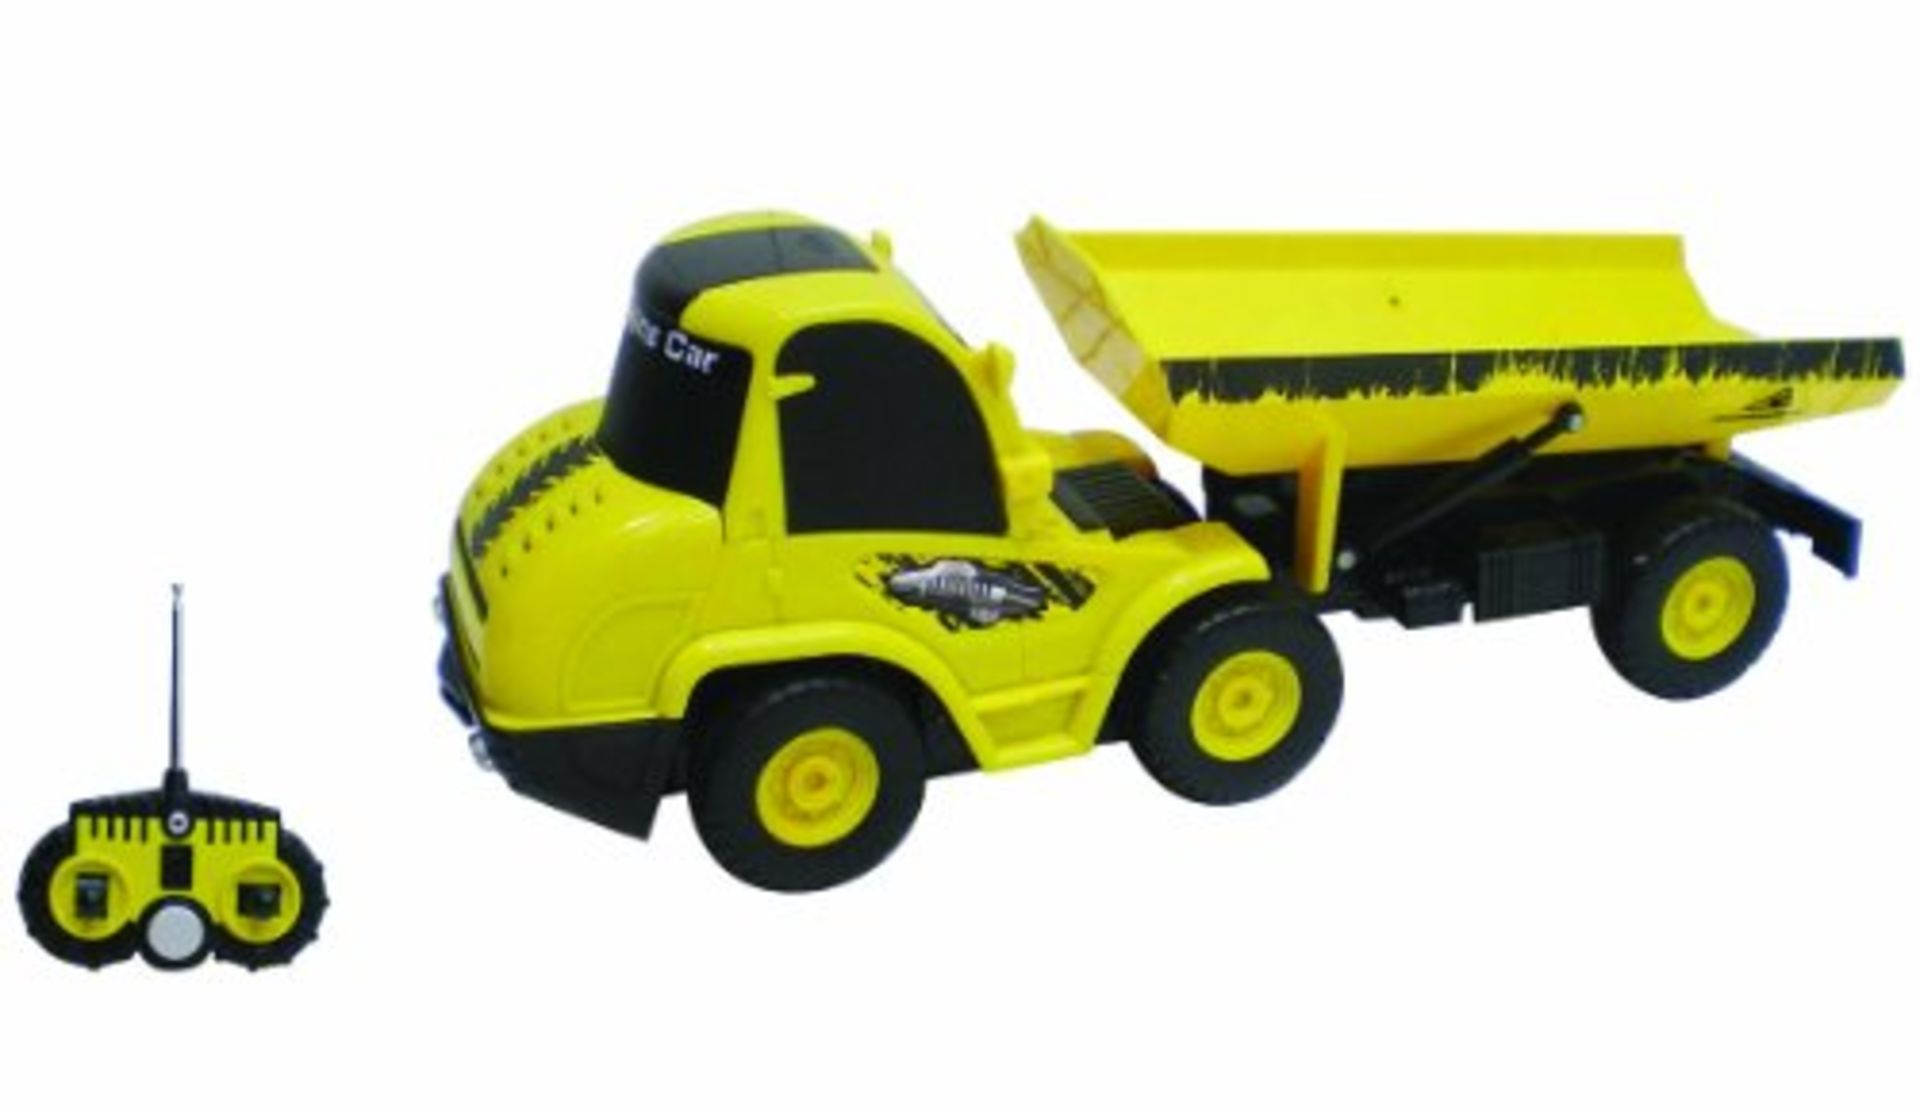 V *TRADE QTY* Brand New 1:20 Remote Control Construction Tipper Vehicle X 20 YOUR BID PRICE TO BE